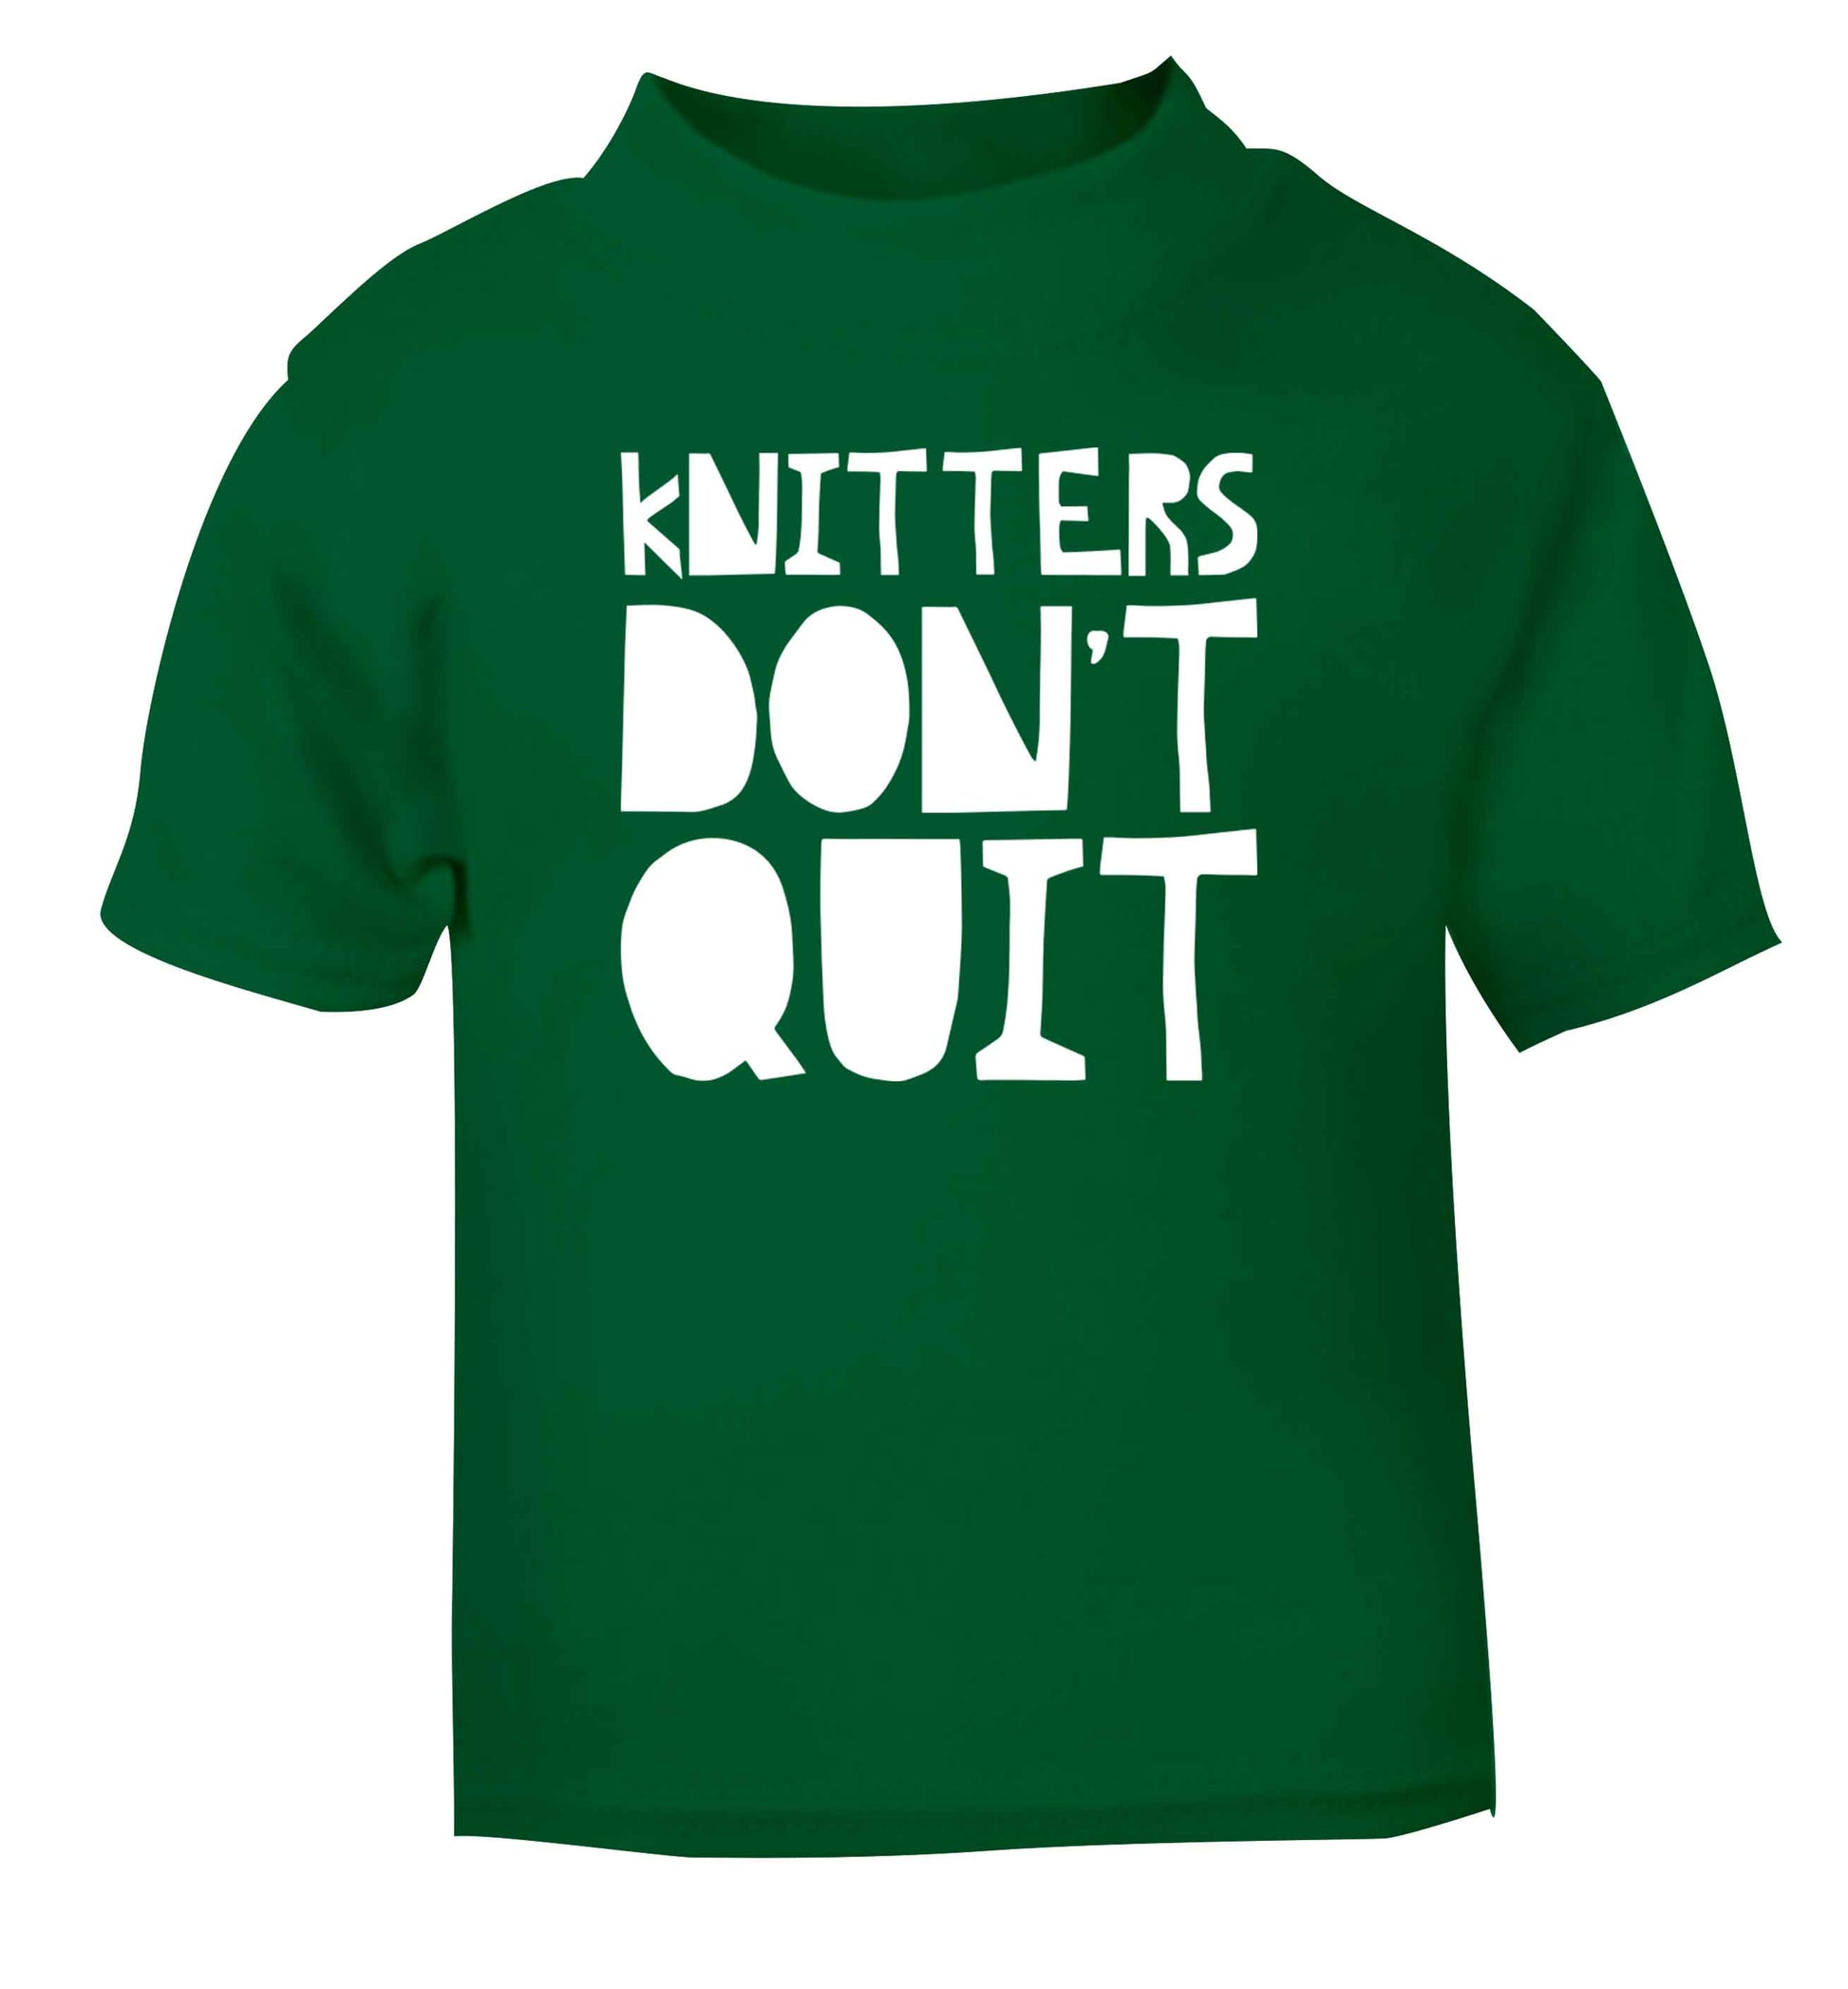 Knitters don't quit green Baby Toddler Tshirt 2 Years